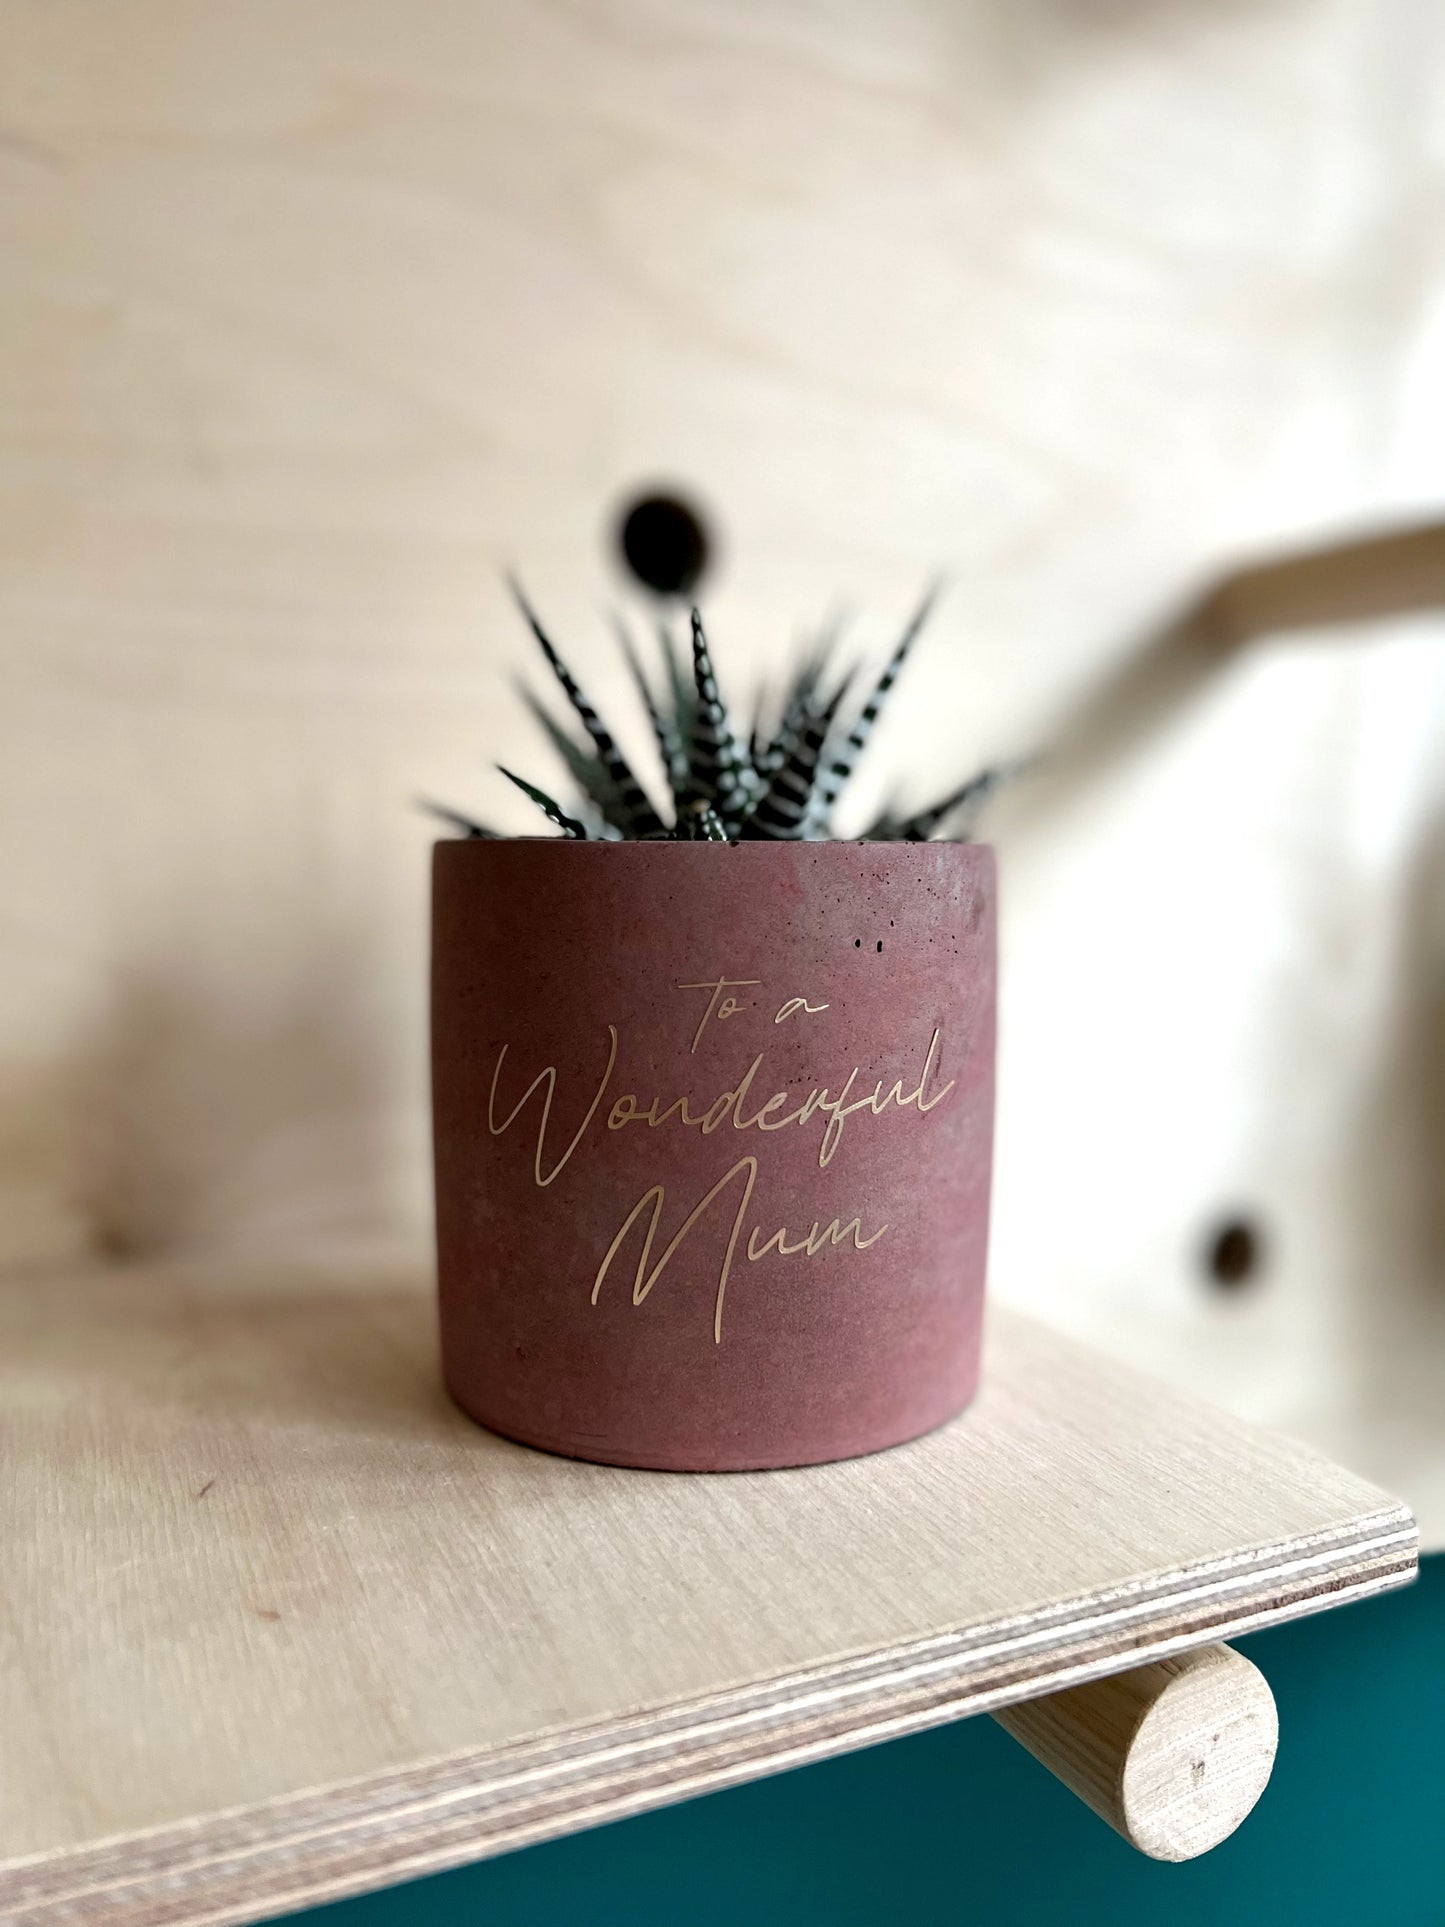 Mother’s Day Planter